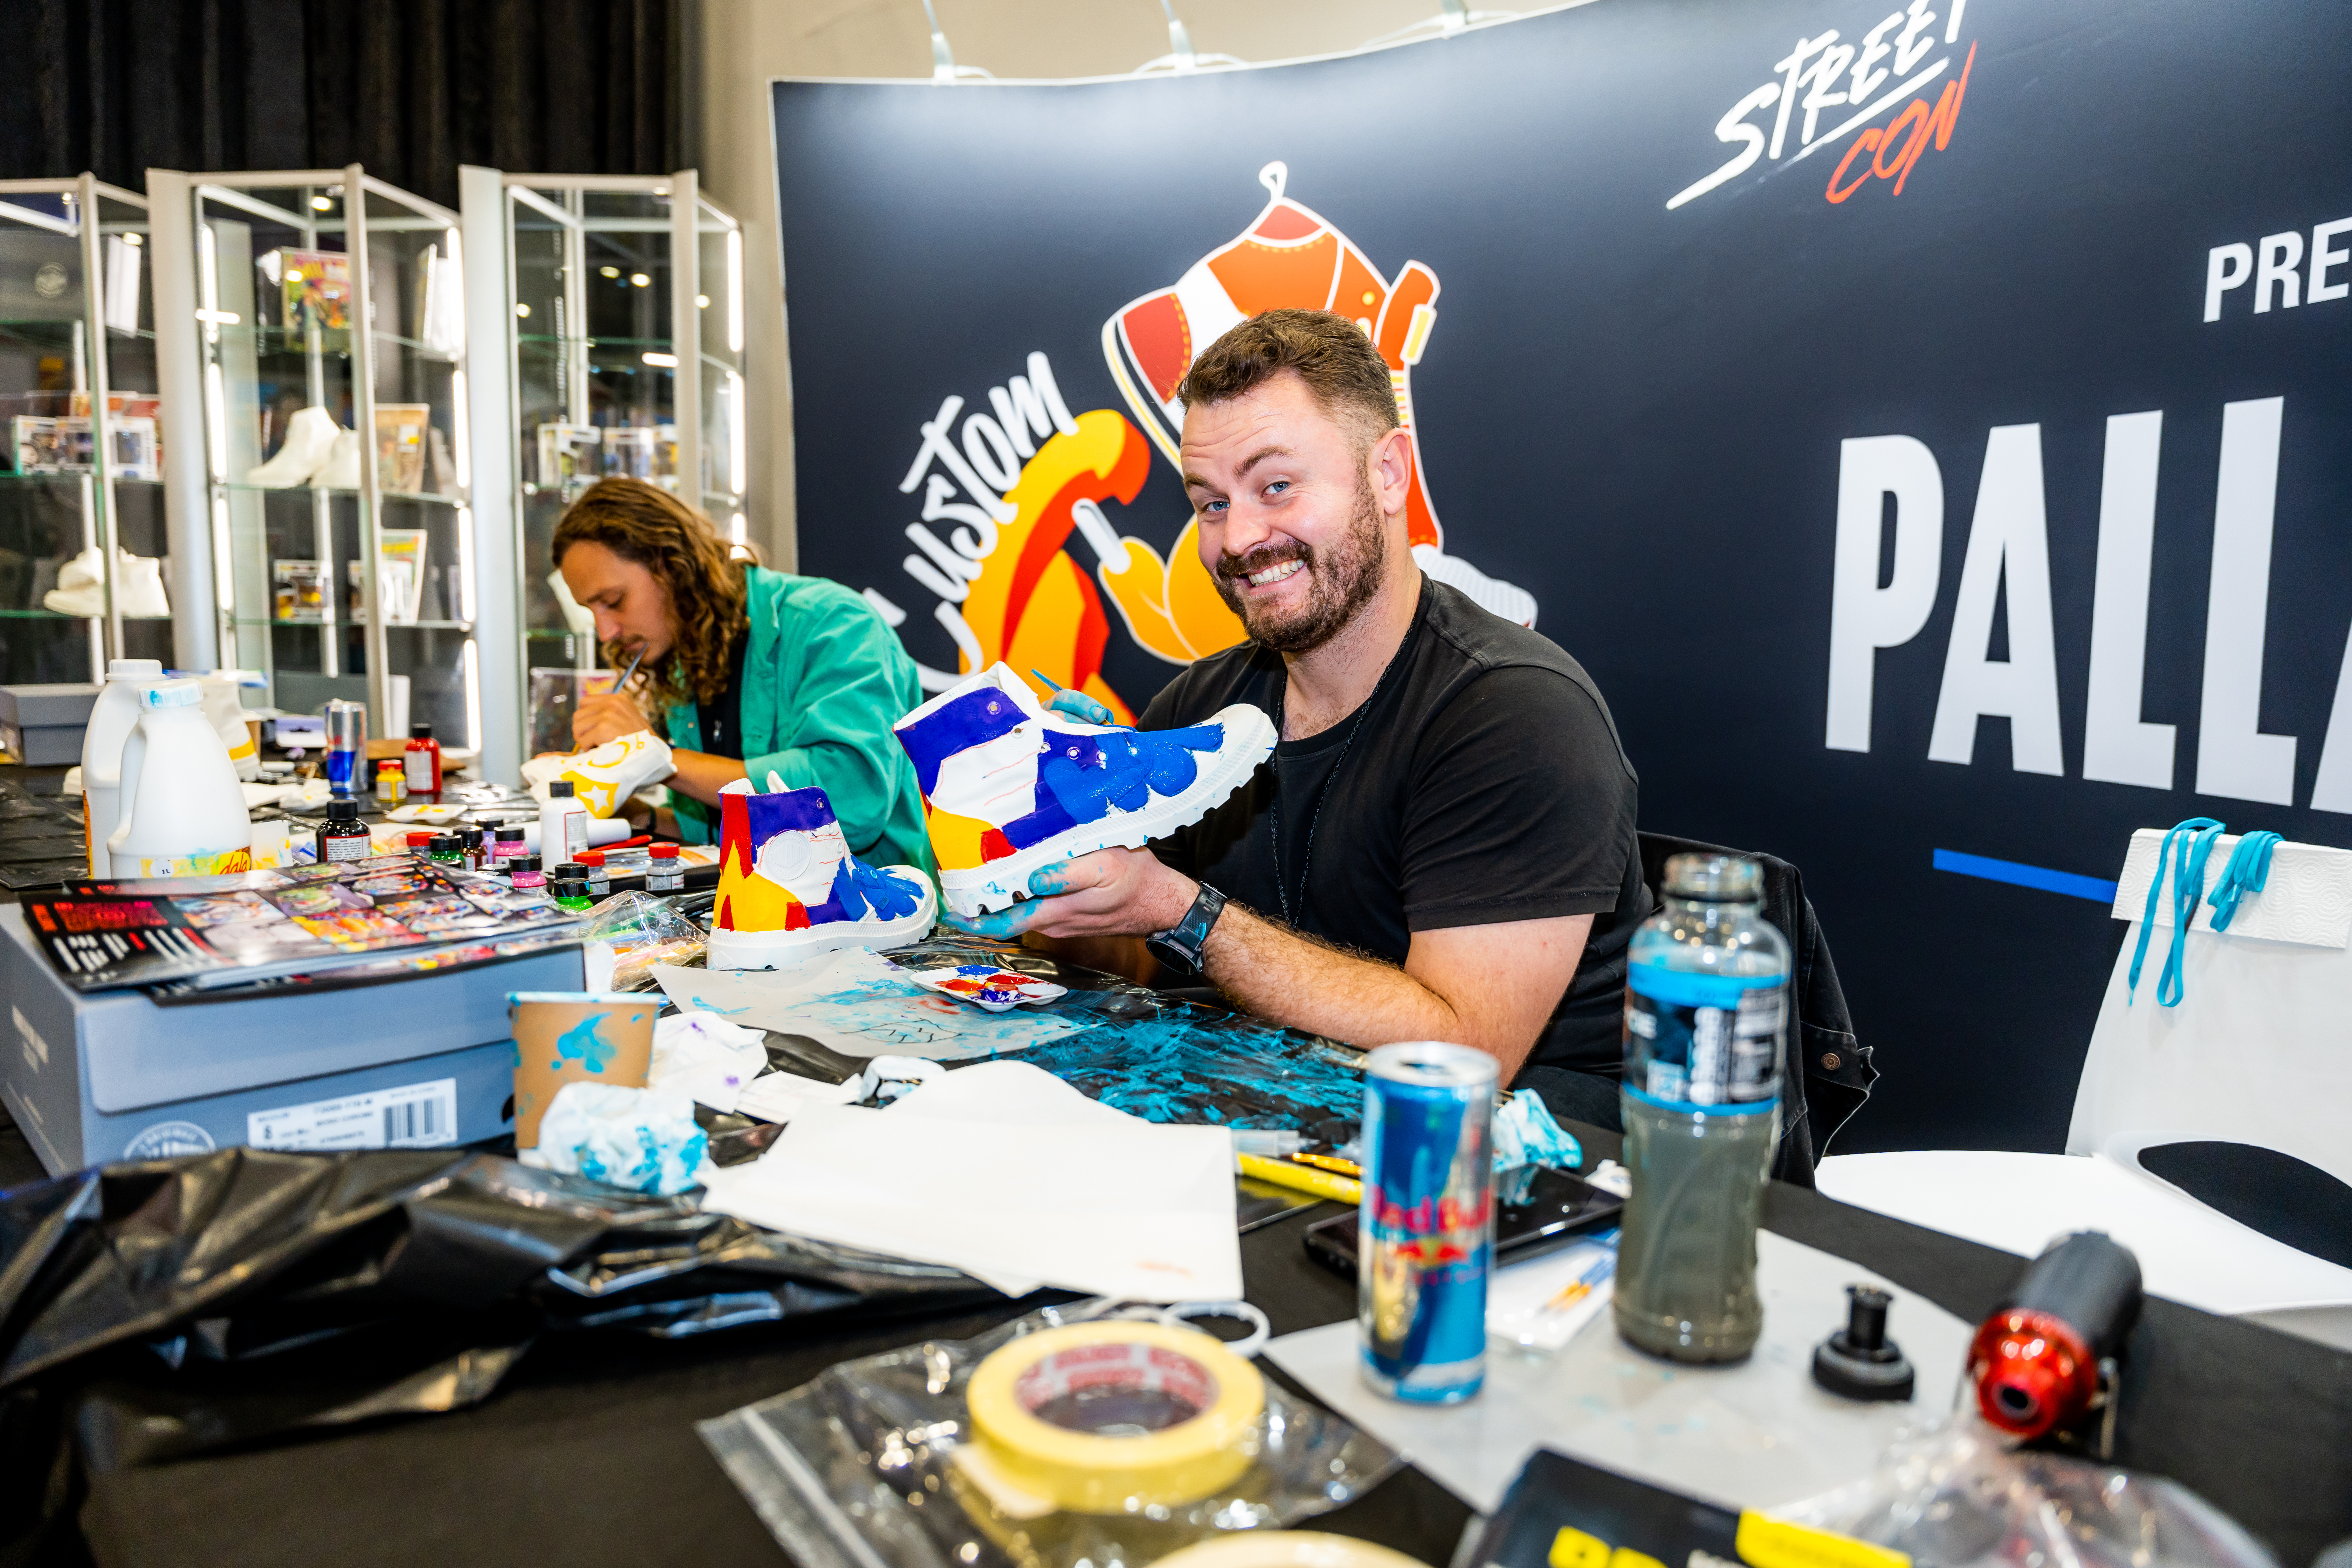 Sneaker painting at Comic Con Cape Town. Image: Matthew Sleep